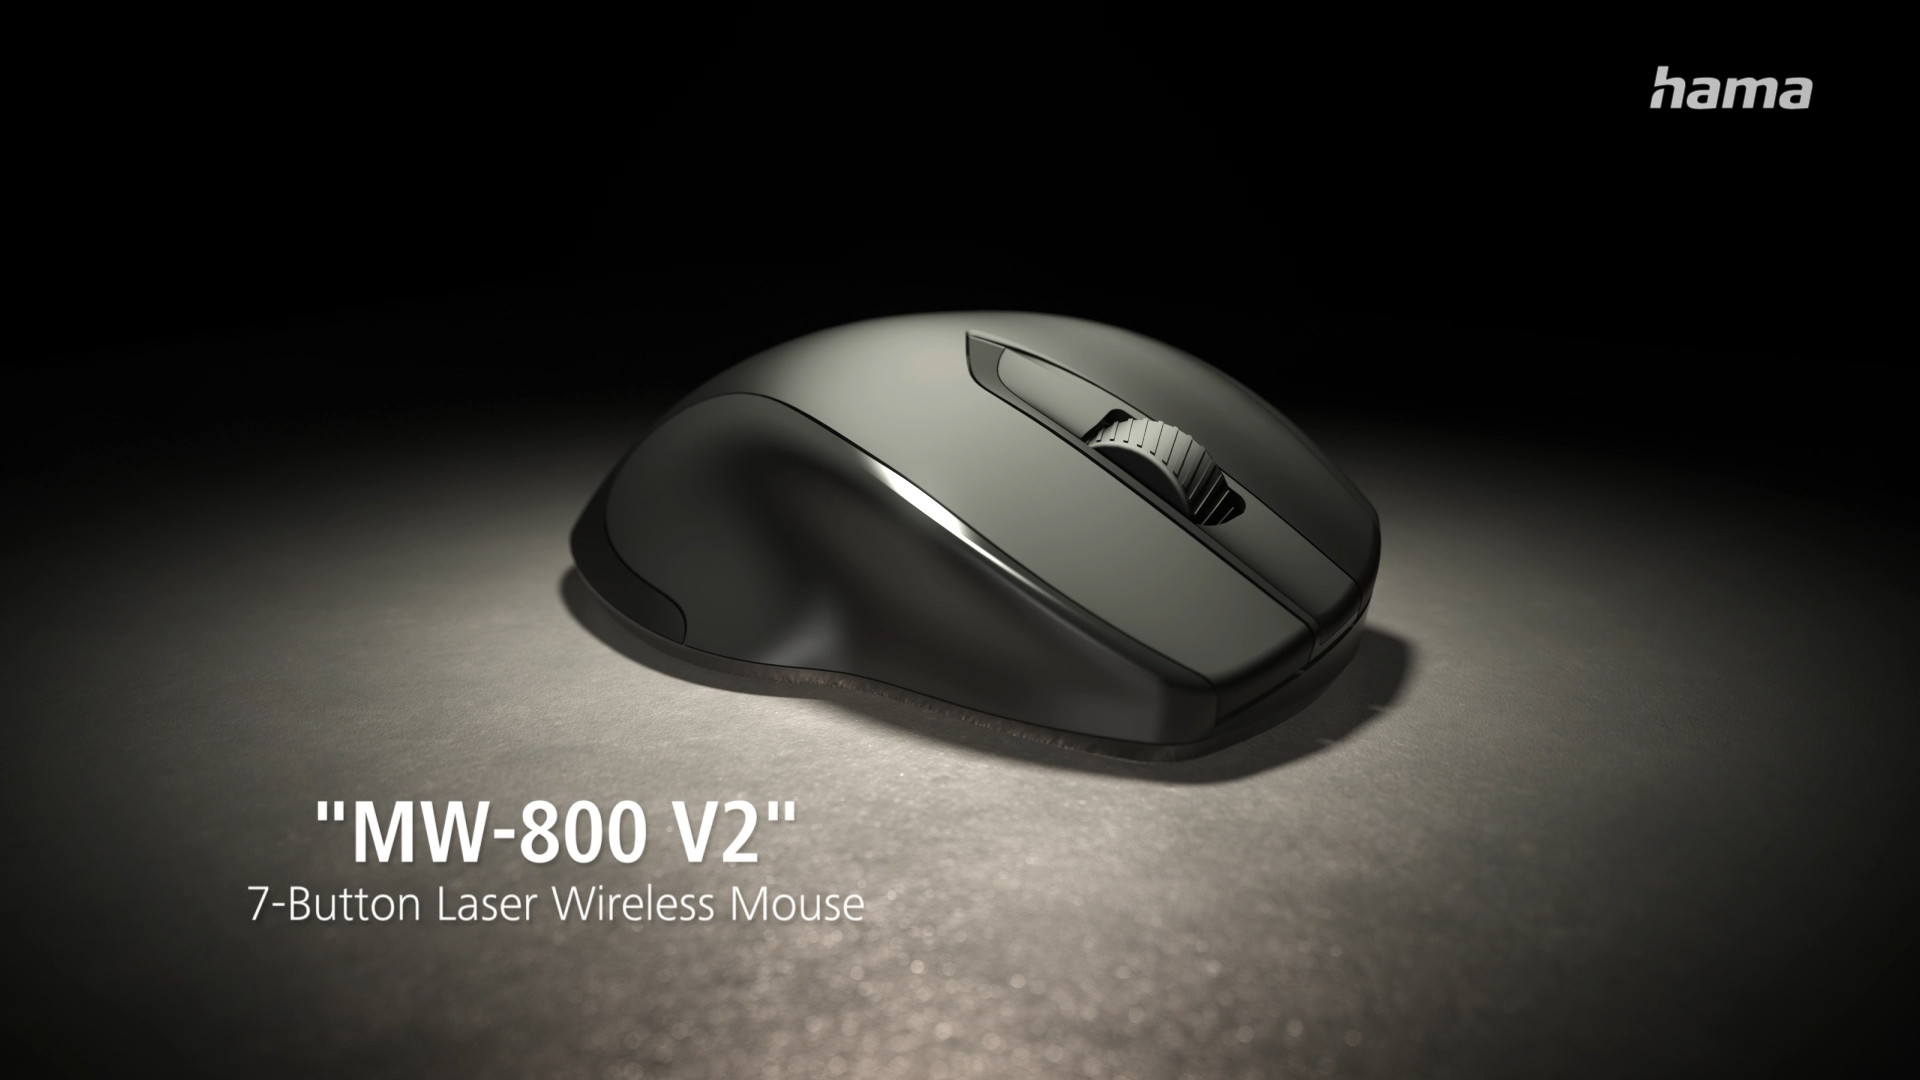 Hama "MW-800" 7-Button Laser Wireless Mouse